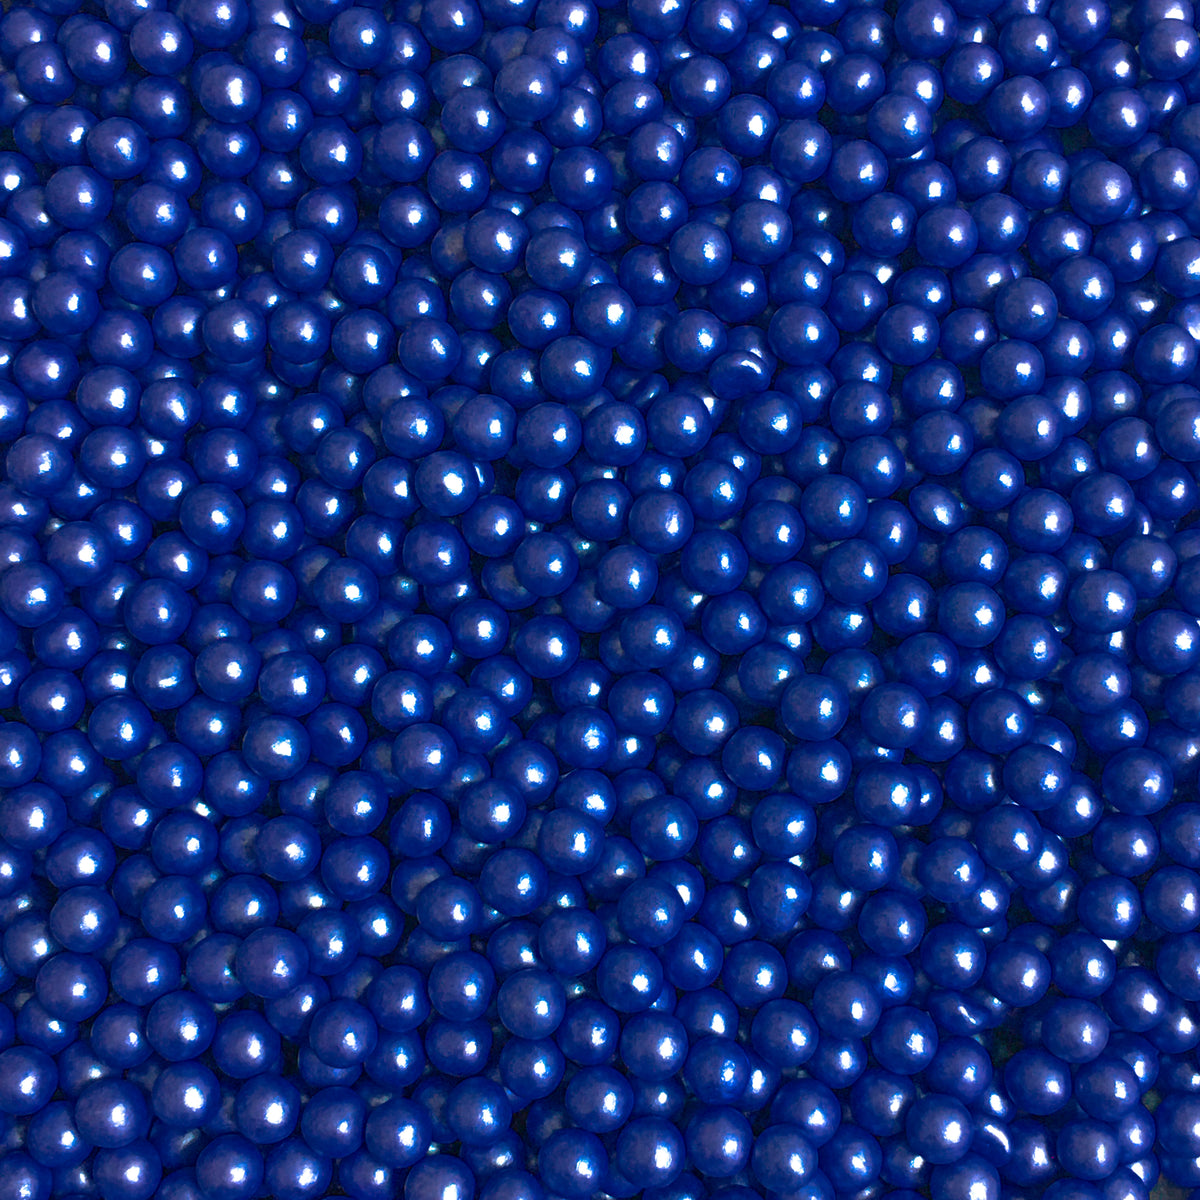 O'Creme Blue Edible Sugar Pearls Cake Decorating Supplies for Bakers:  Cookie, Cupcake & Icing Toppings, Beads Sprinkles For Baking, Kosher  Certified